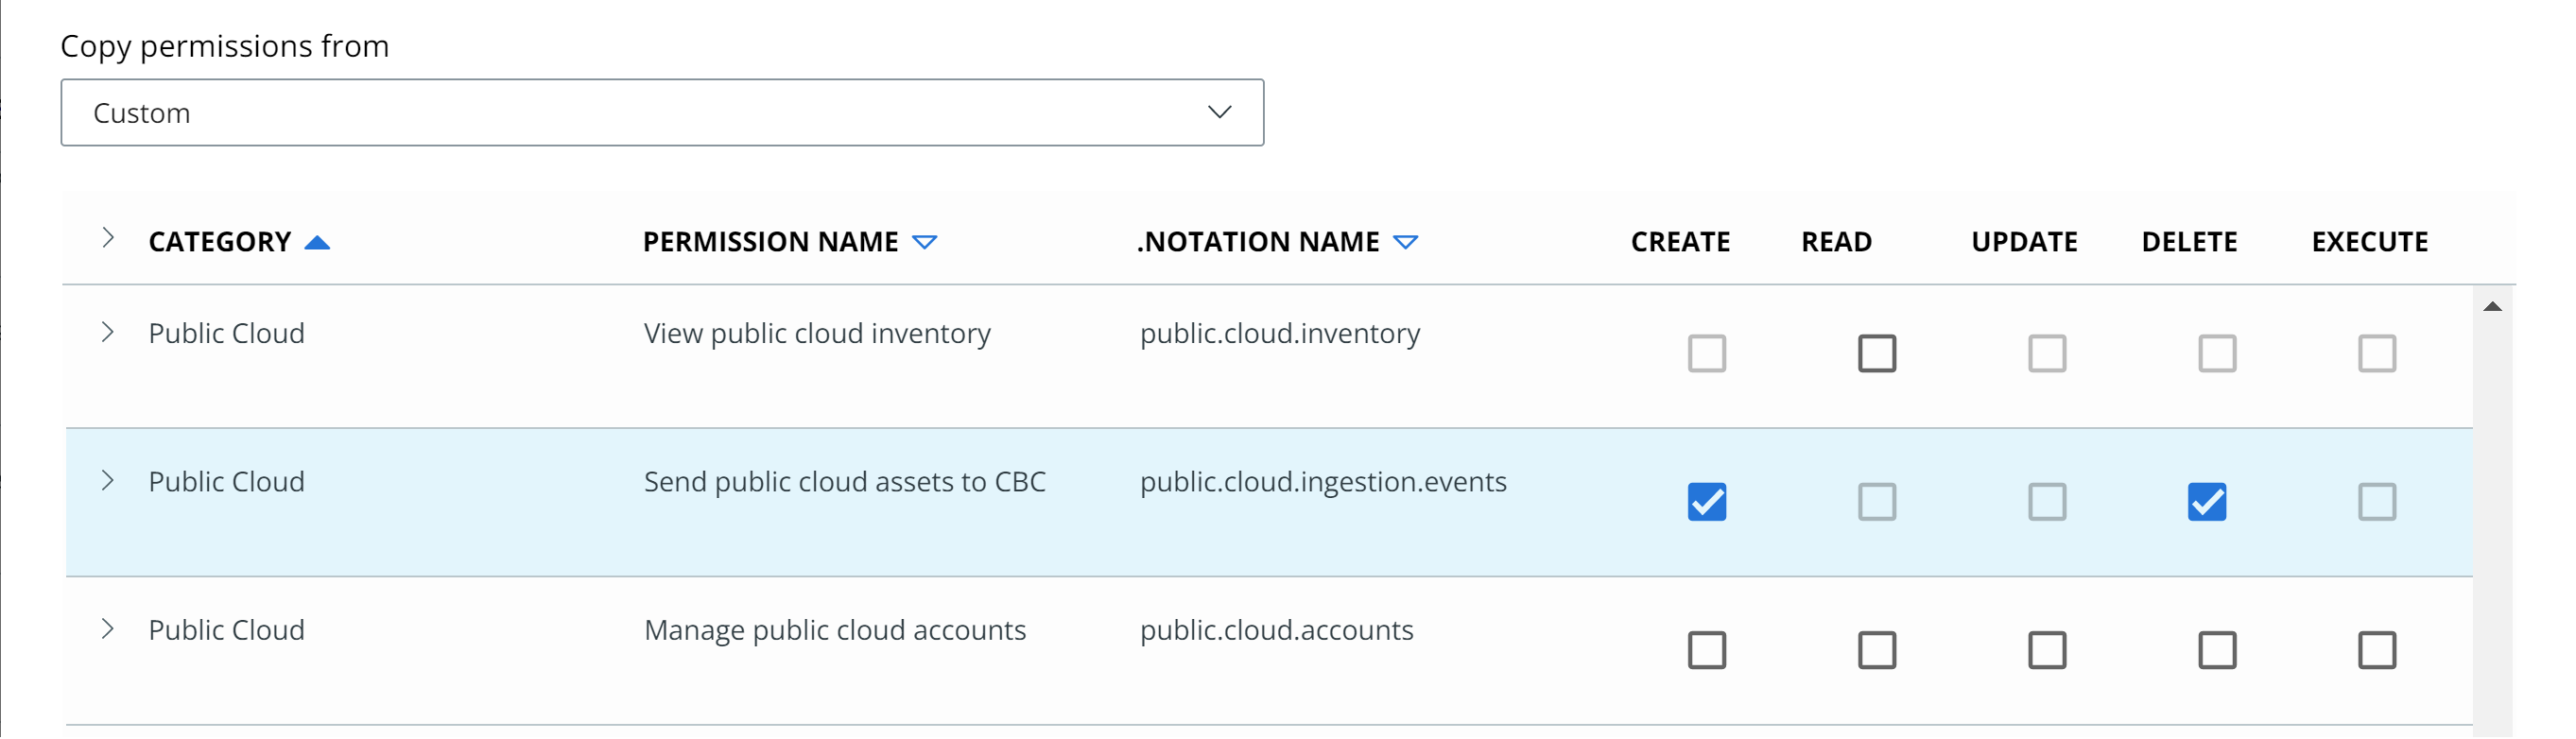 Defining the Public Cloud permissions in the Add Access Level page for running the event stream setup script.